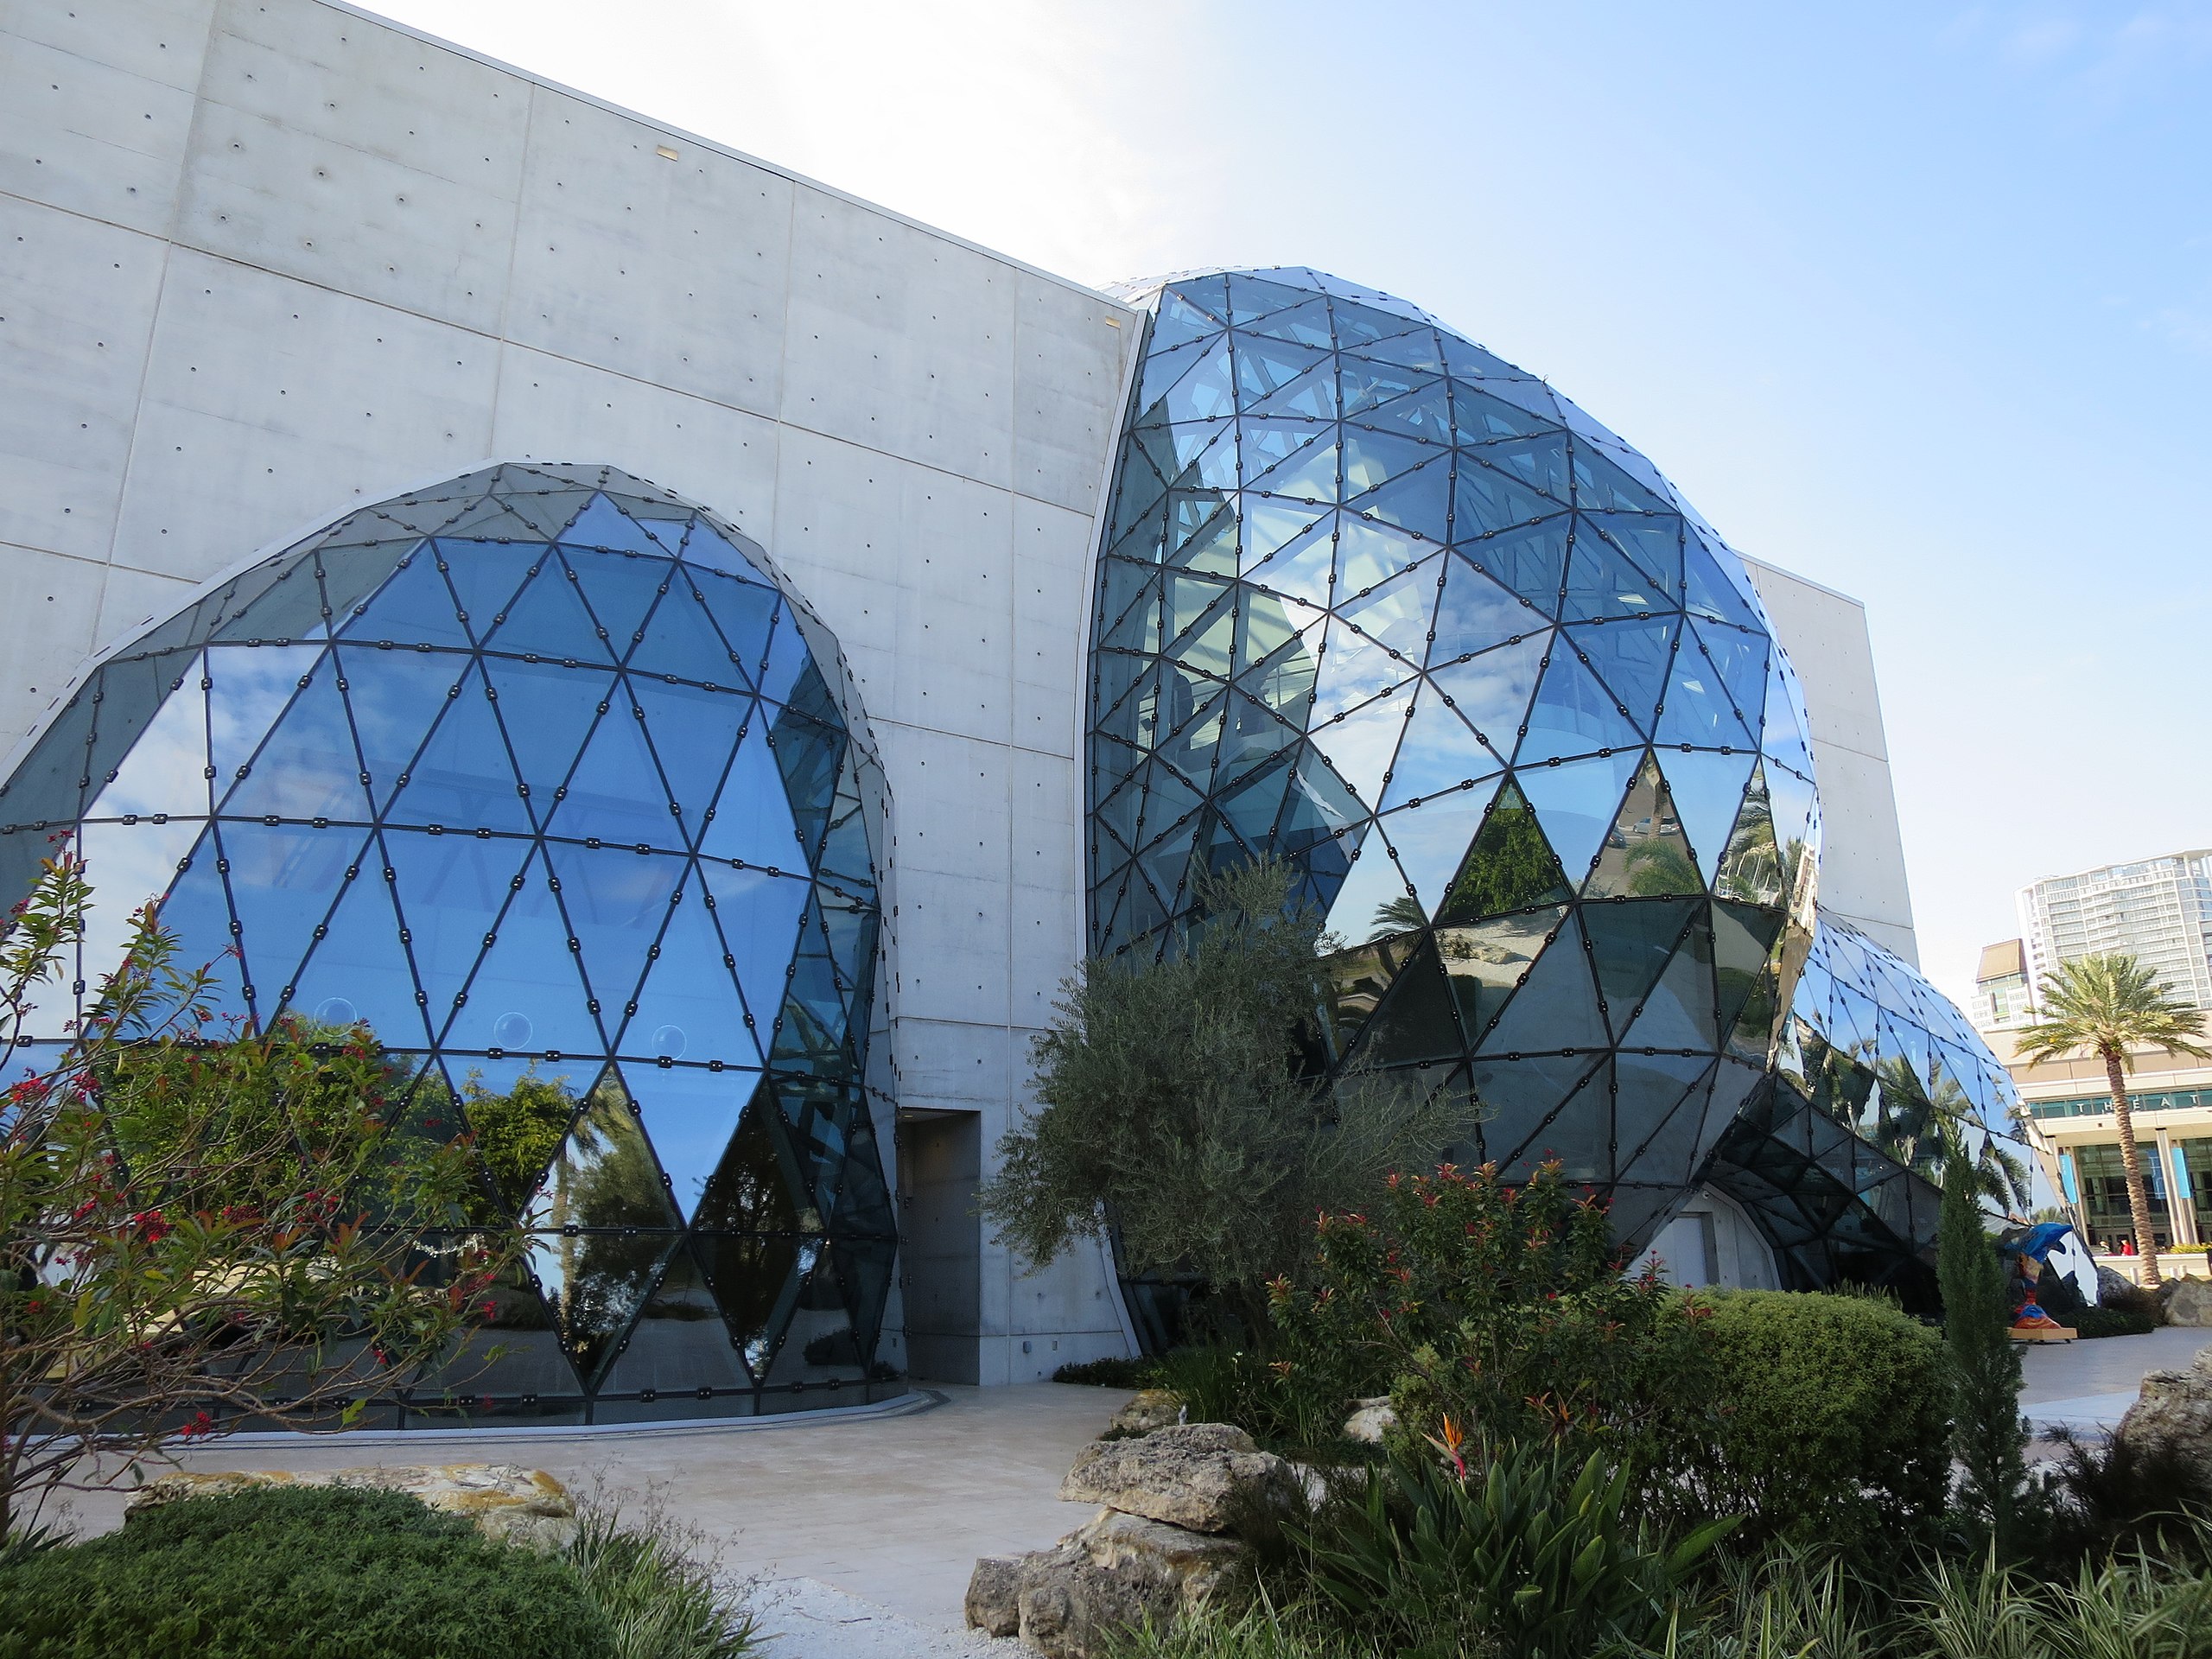 <p>Inside the museum, visitors can get a close look at Dali’s work and learn more about his life and how his experiences influenced his artistic style. It’s a beautiful, mind-bending experience that’s well worth the visit.</p>